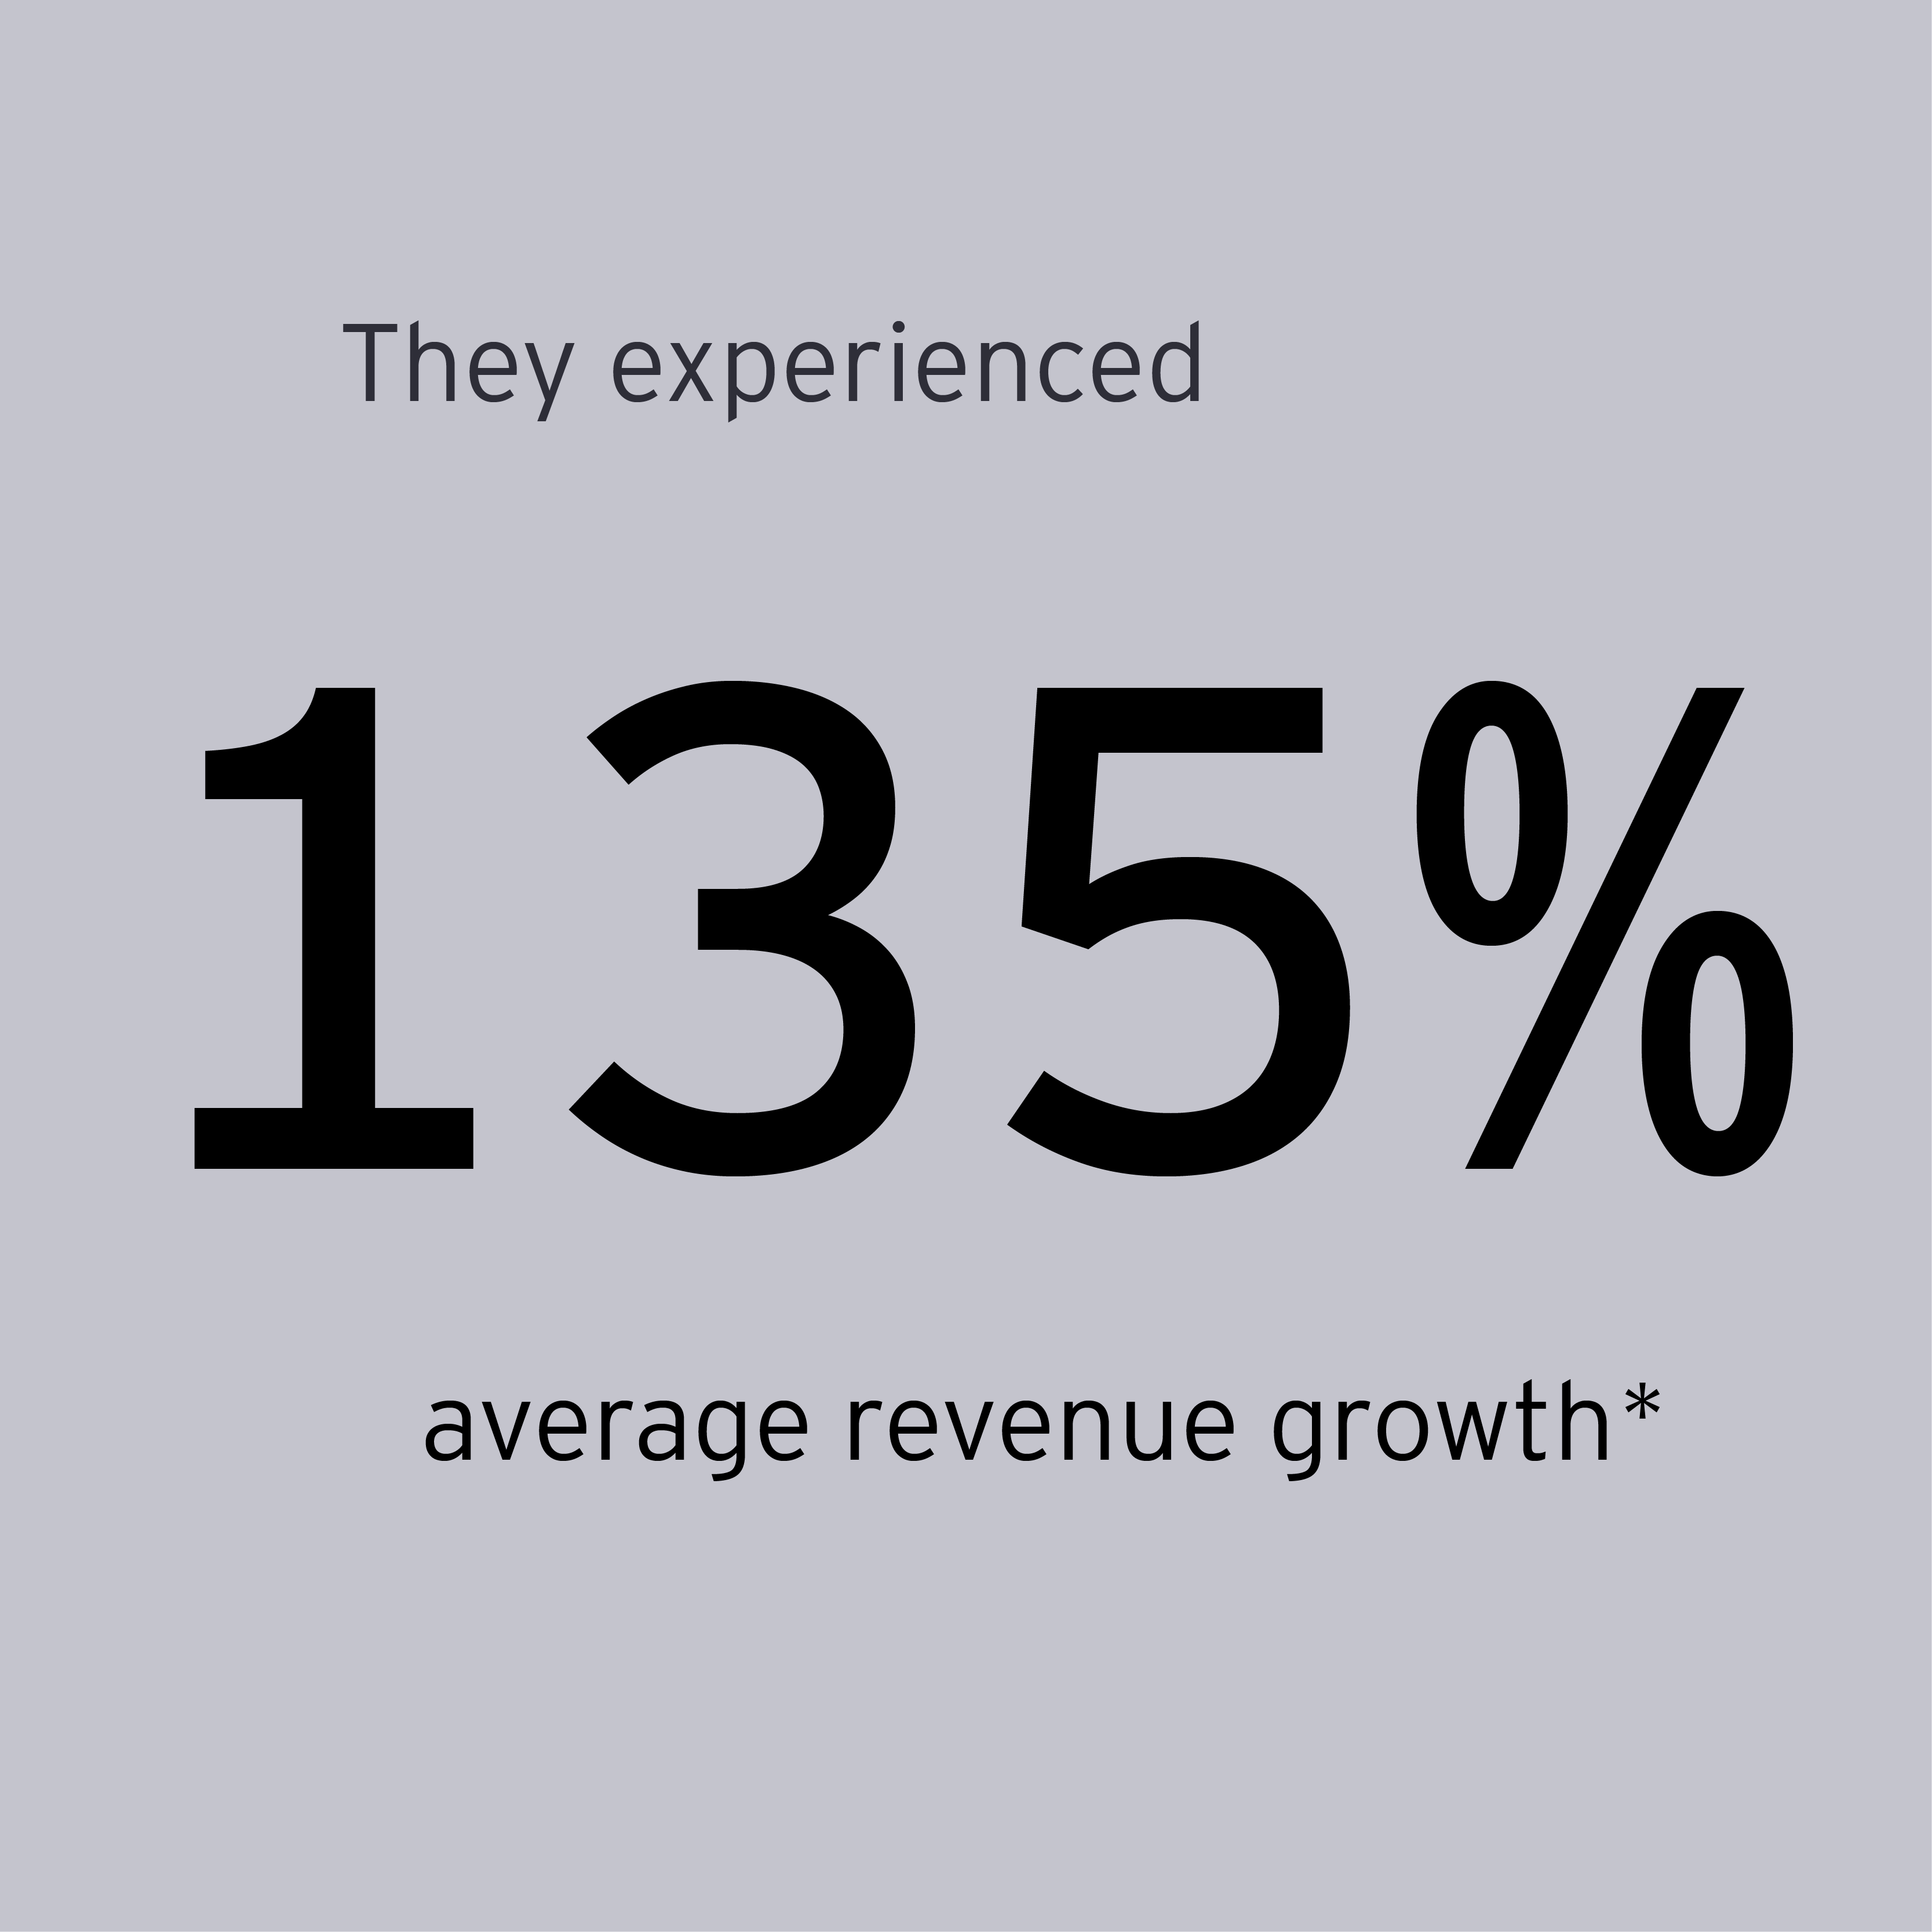 They experienced 135% average revenue growth*